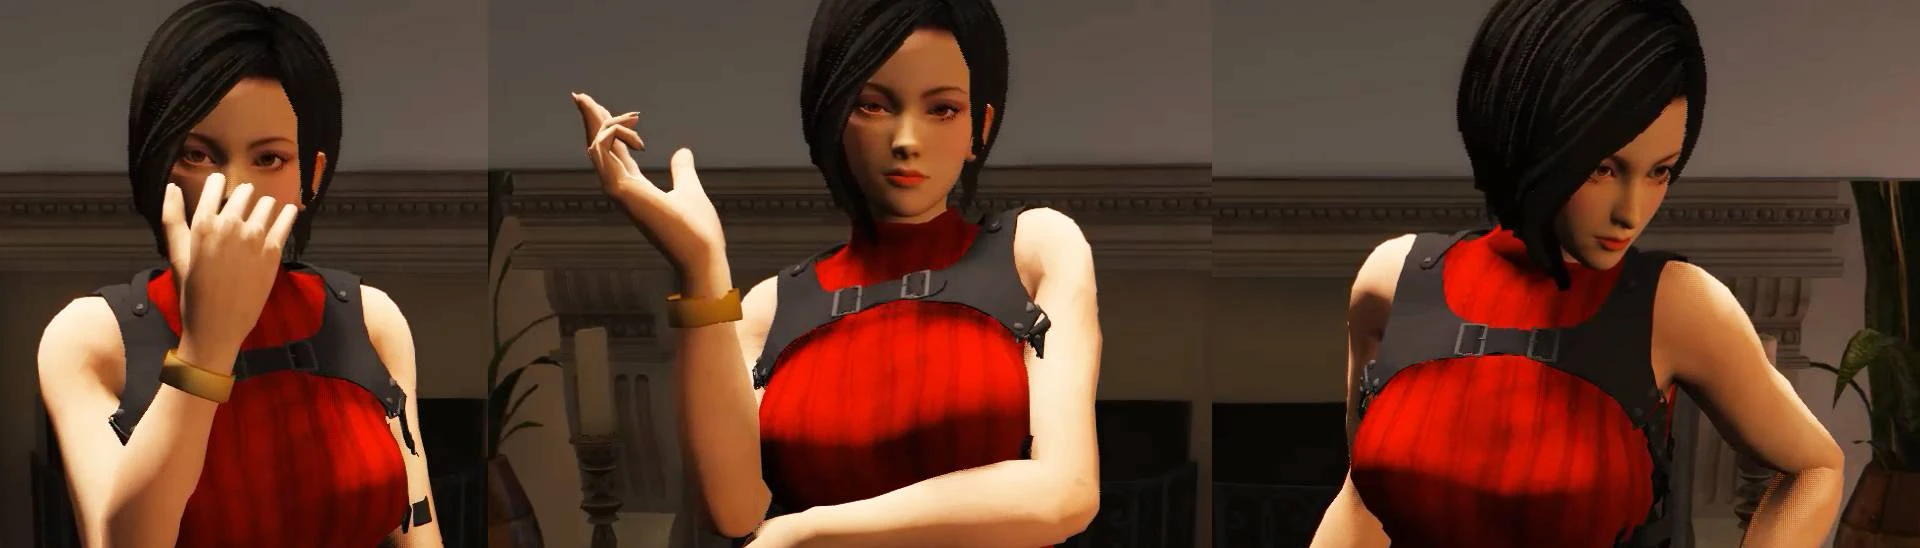 Ada Wong Resident Evil 2 Remake [Add-On Ped